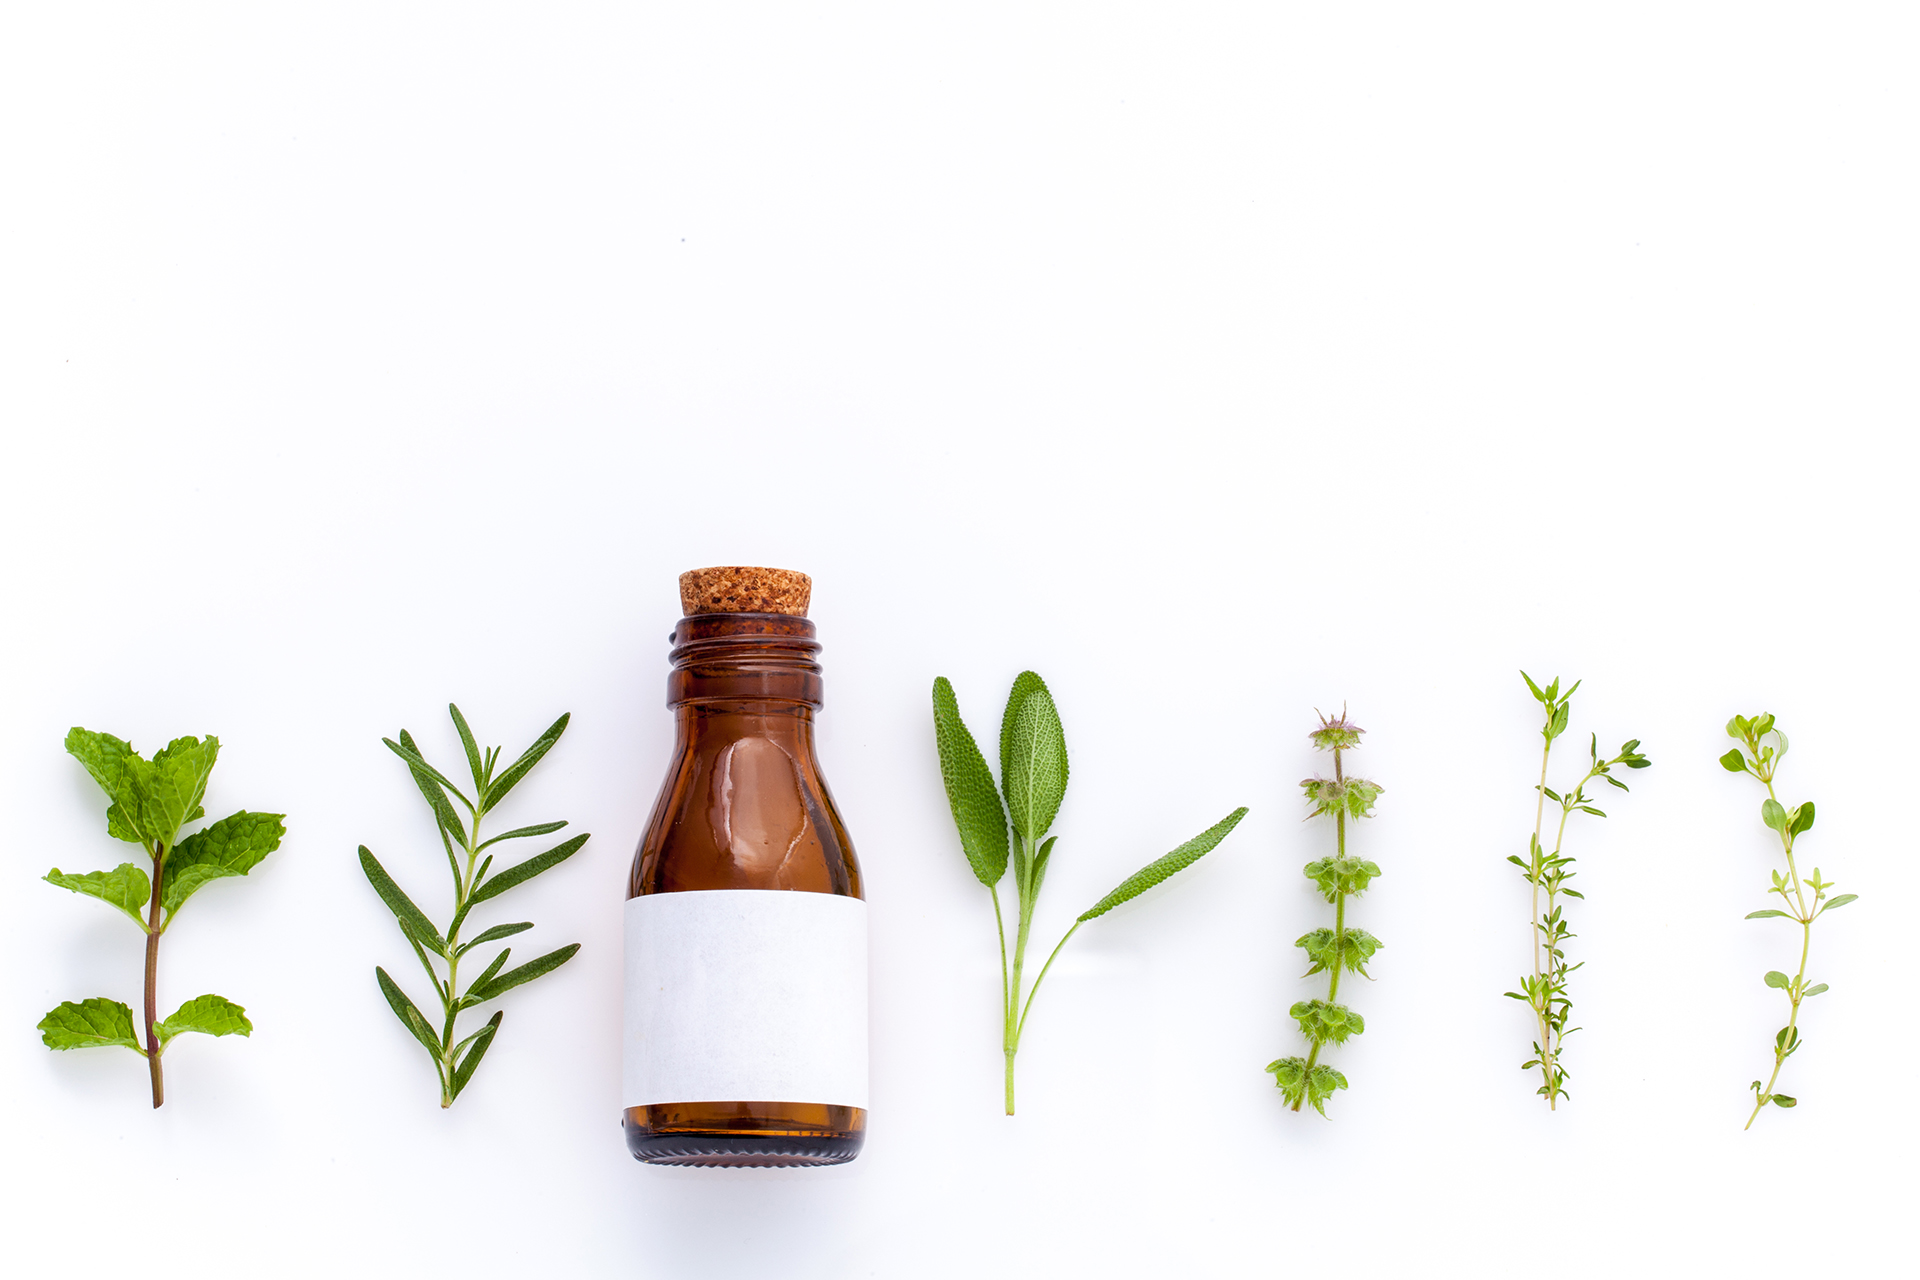 Bottle of essential oil with herb holy basil leaf, rosemary,oregano, sage,basil and mint on white background.